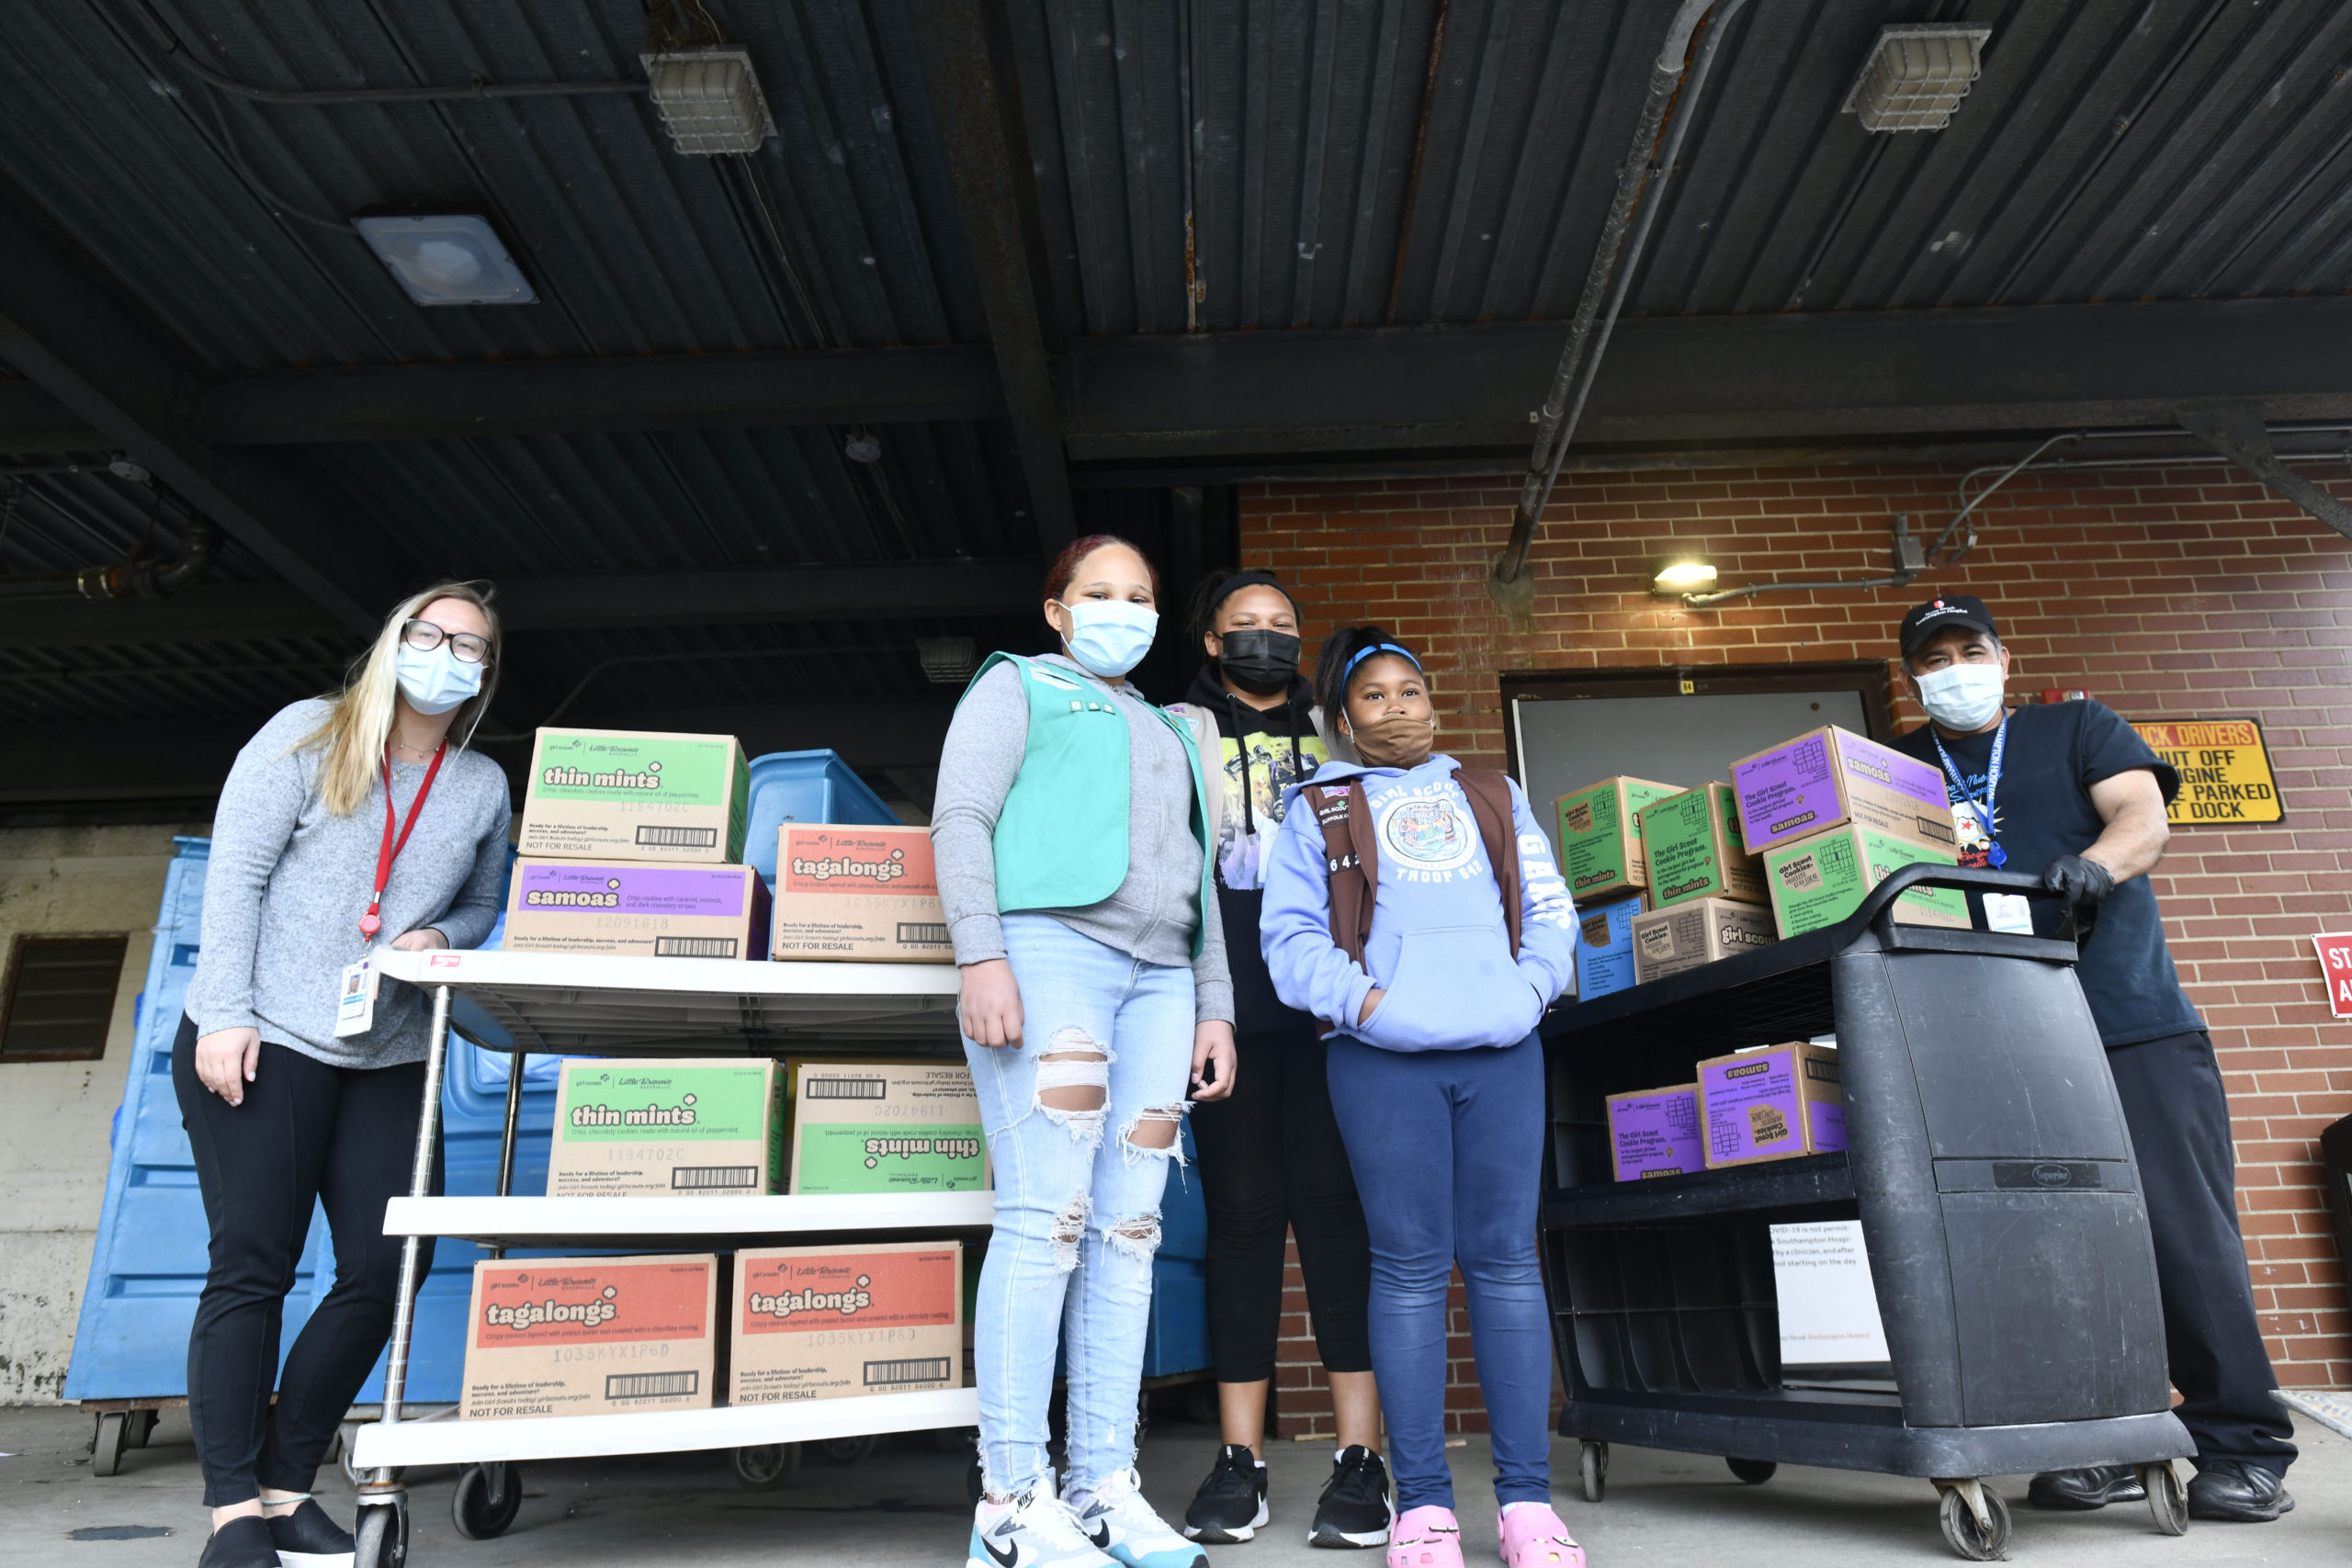 Members of Girl Scout Troop 642, Gabriella Gaines, Syvana Smith and Jordyn Smith, from the Shinnecock Nation dropped off 300 boxes (25 cases) of Girls Scout Cookies for the employees at Stony Brook Southampton Hospital on Sunday afternoon. Helping the girls unload are hospital employees Victoria Stanek and Cesar Flores.  DANA SHAW